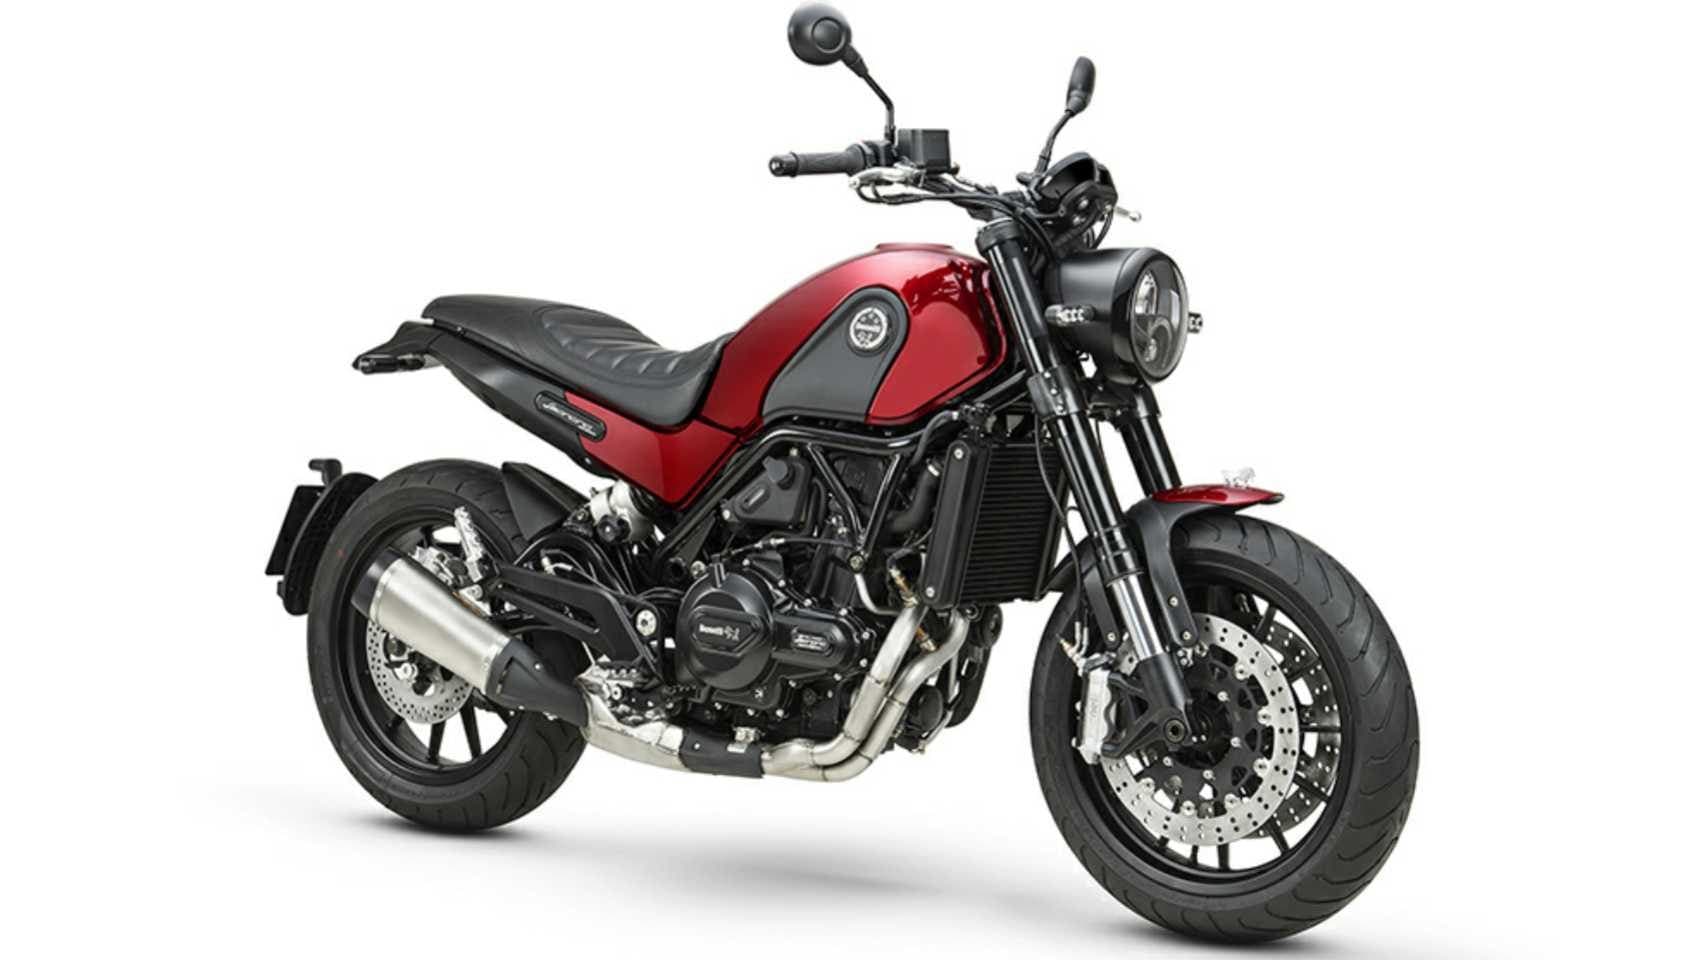  Updated Benelli Leoncino 500 launched in India, pricing starts at Rs 4.60 lakh